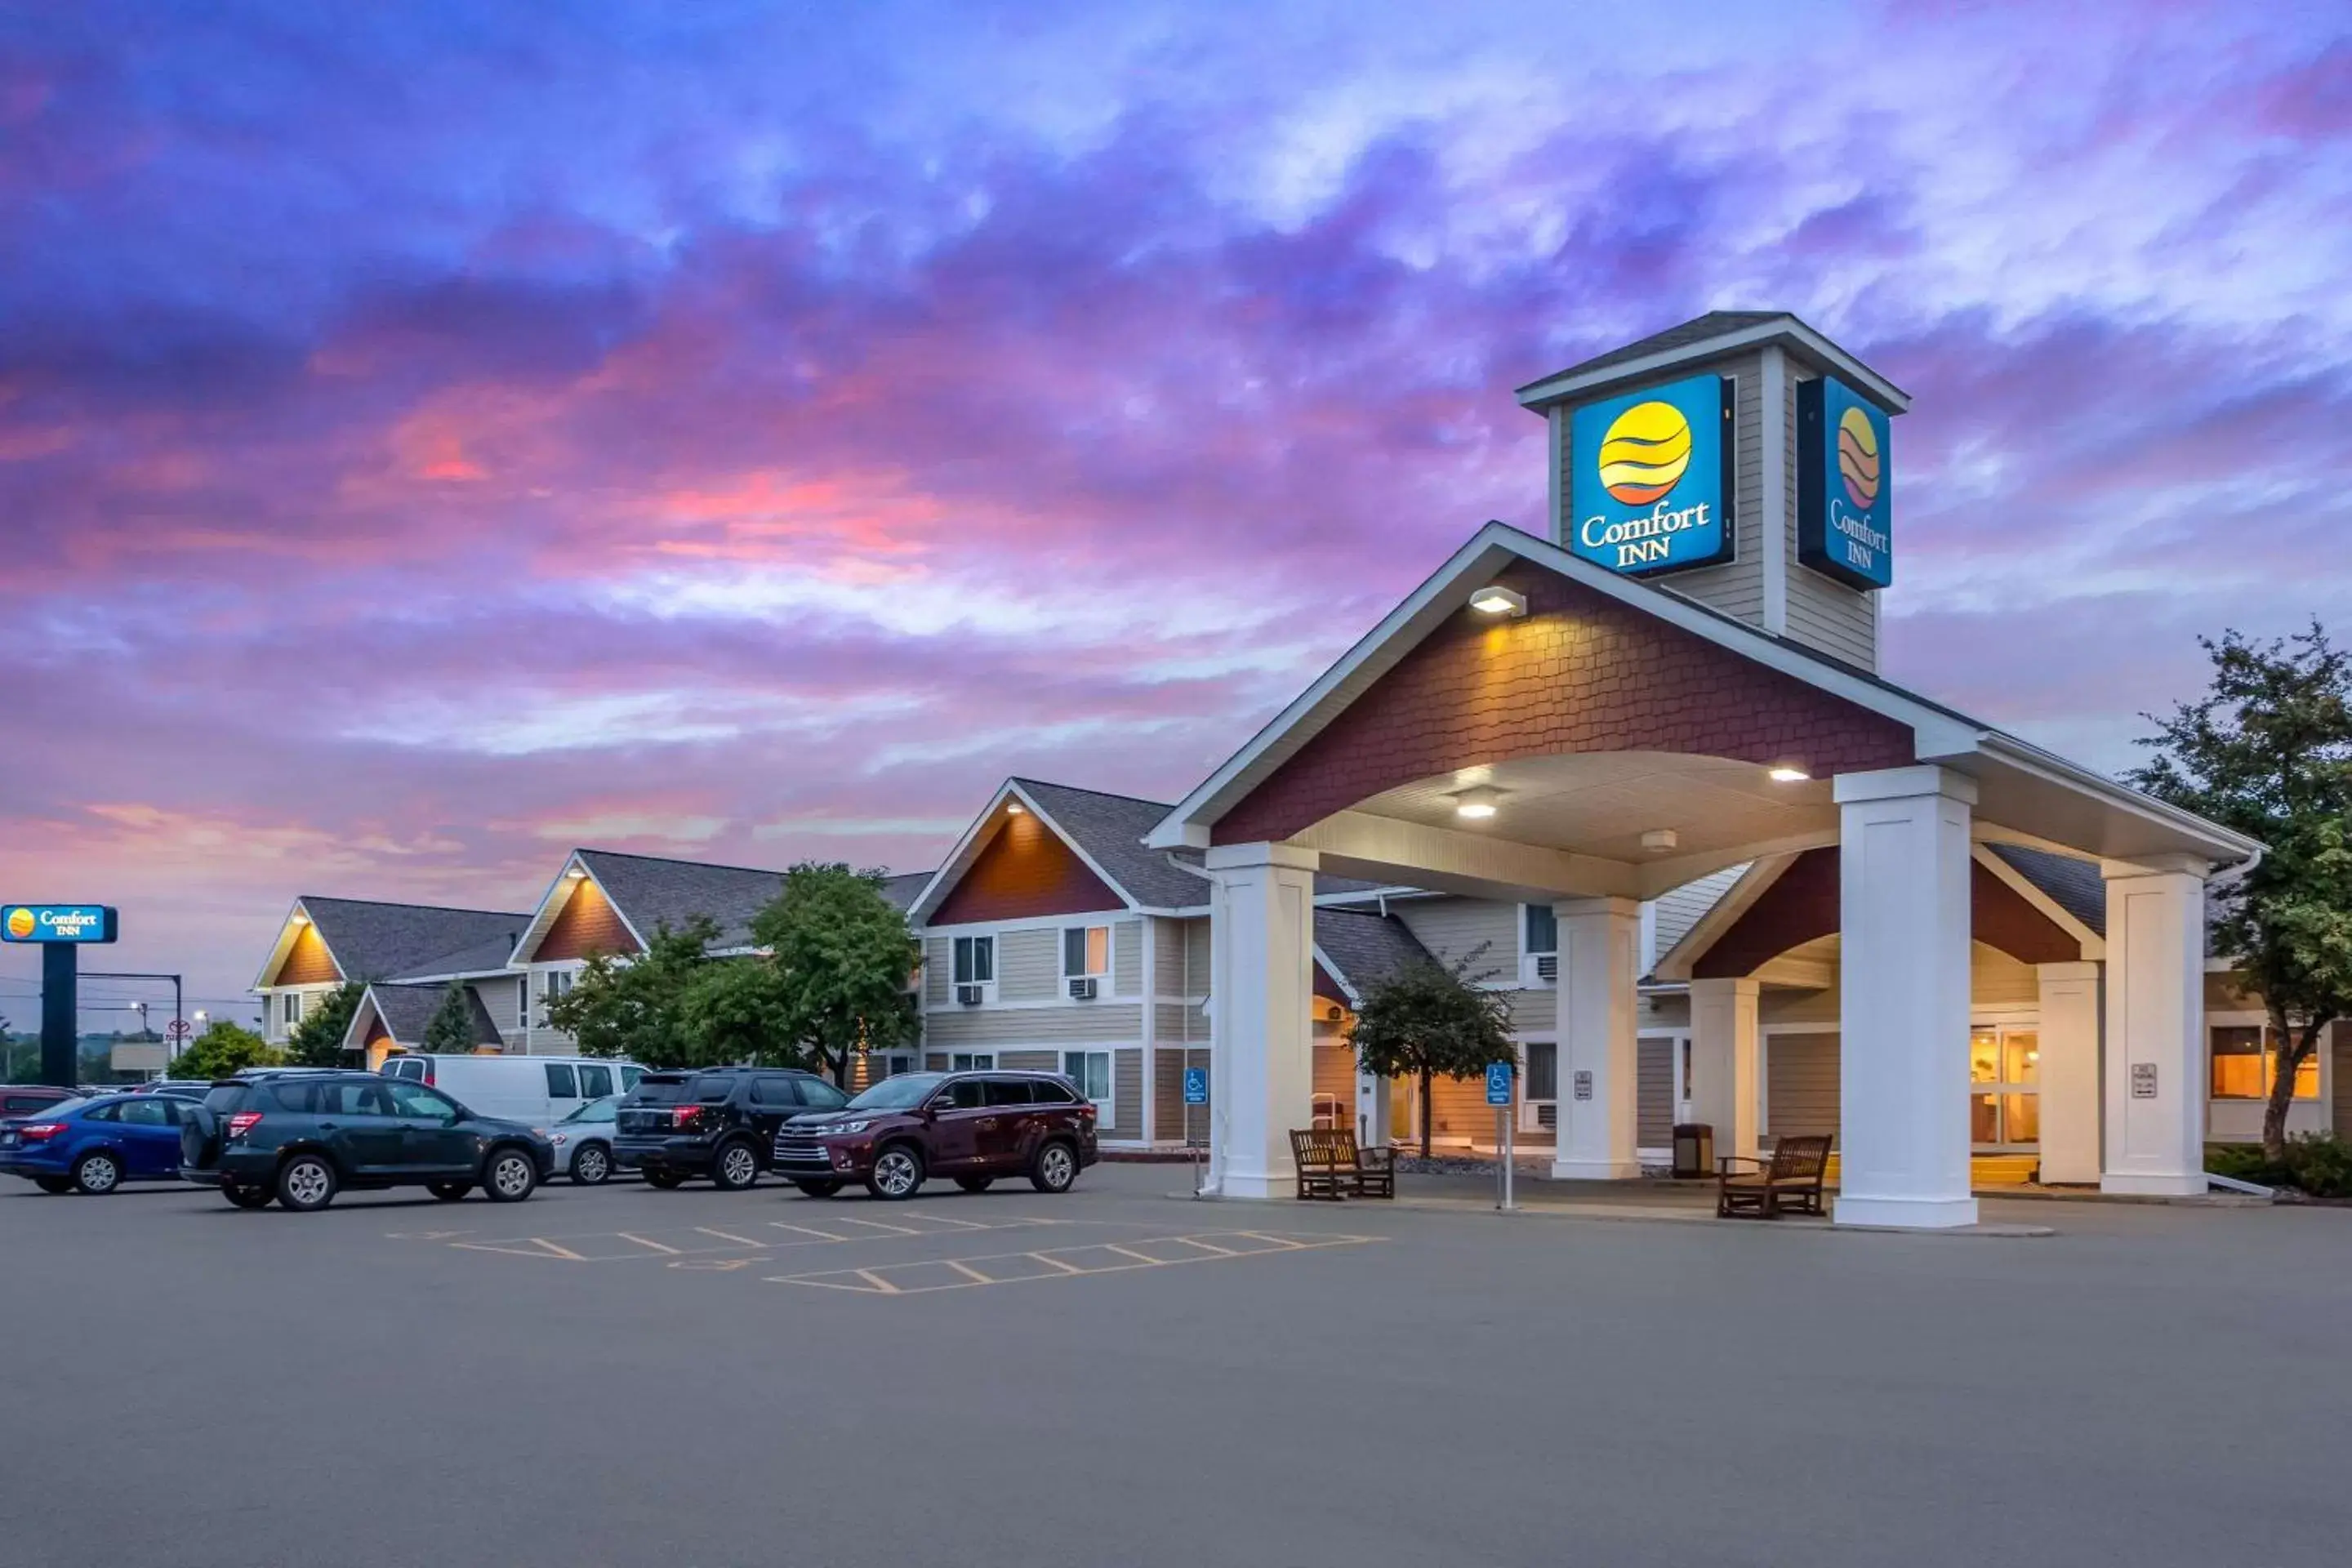 Property Building in Comfort Inn Iron Mountain